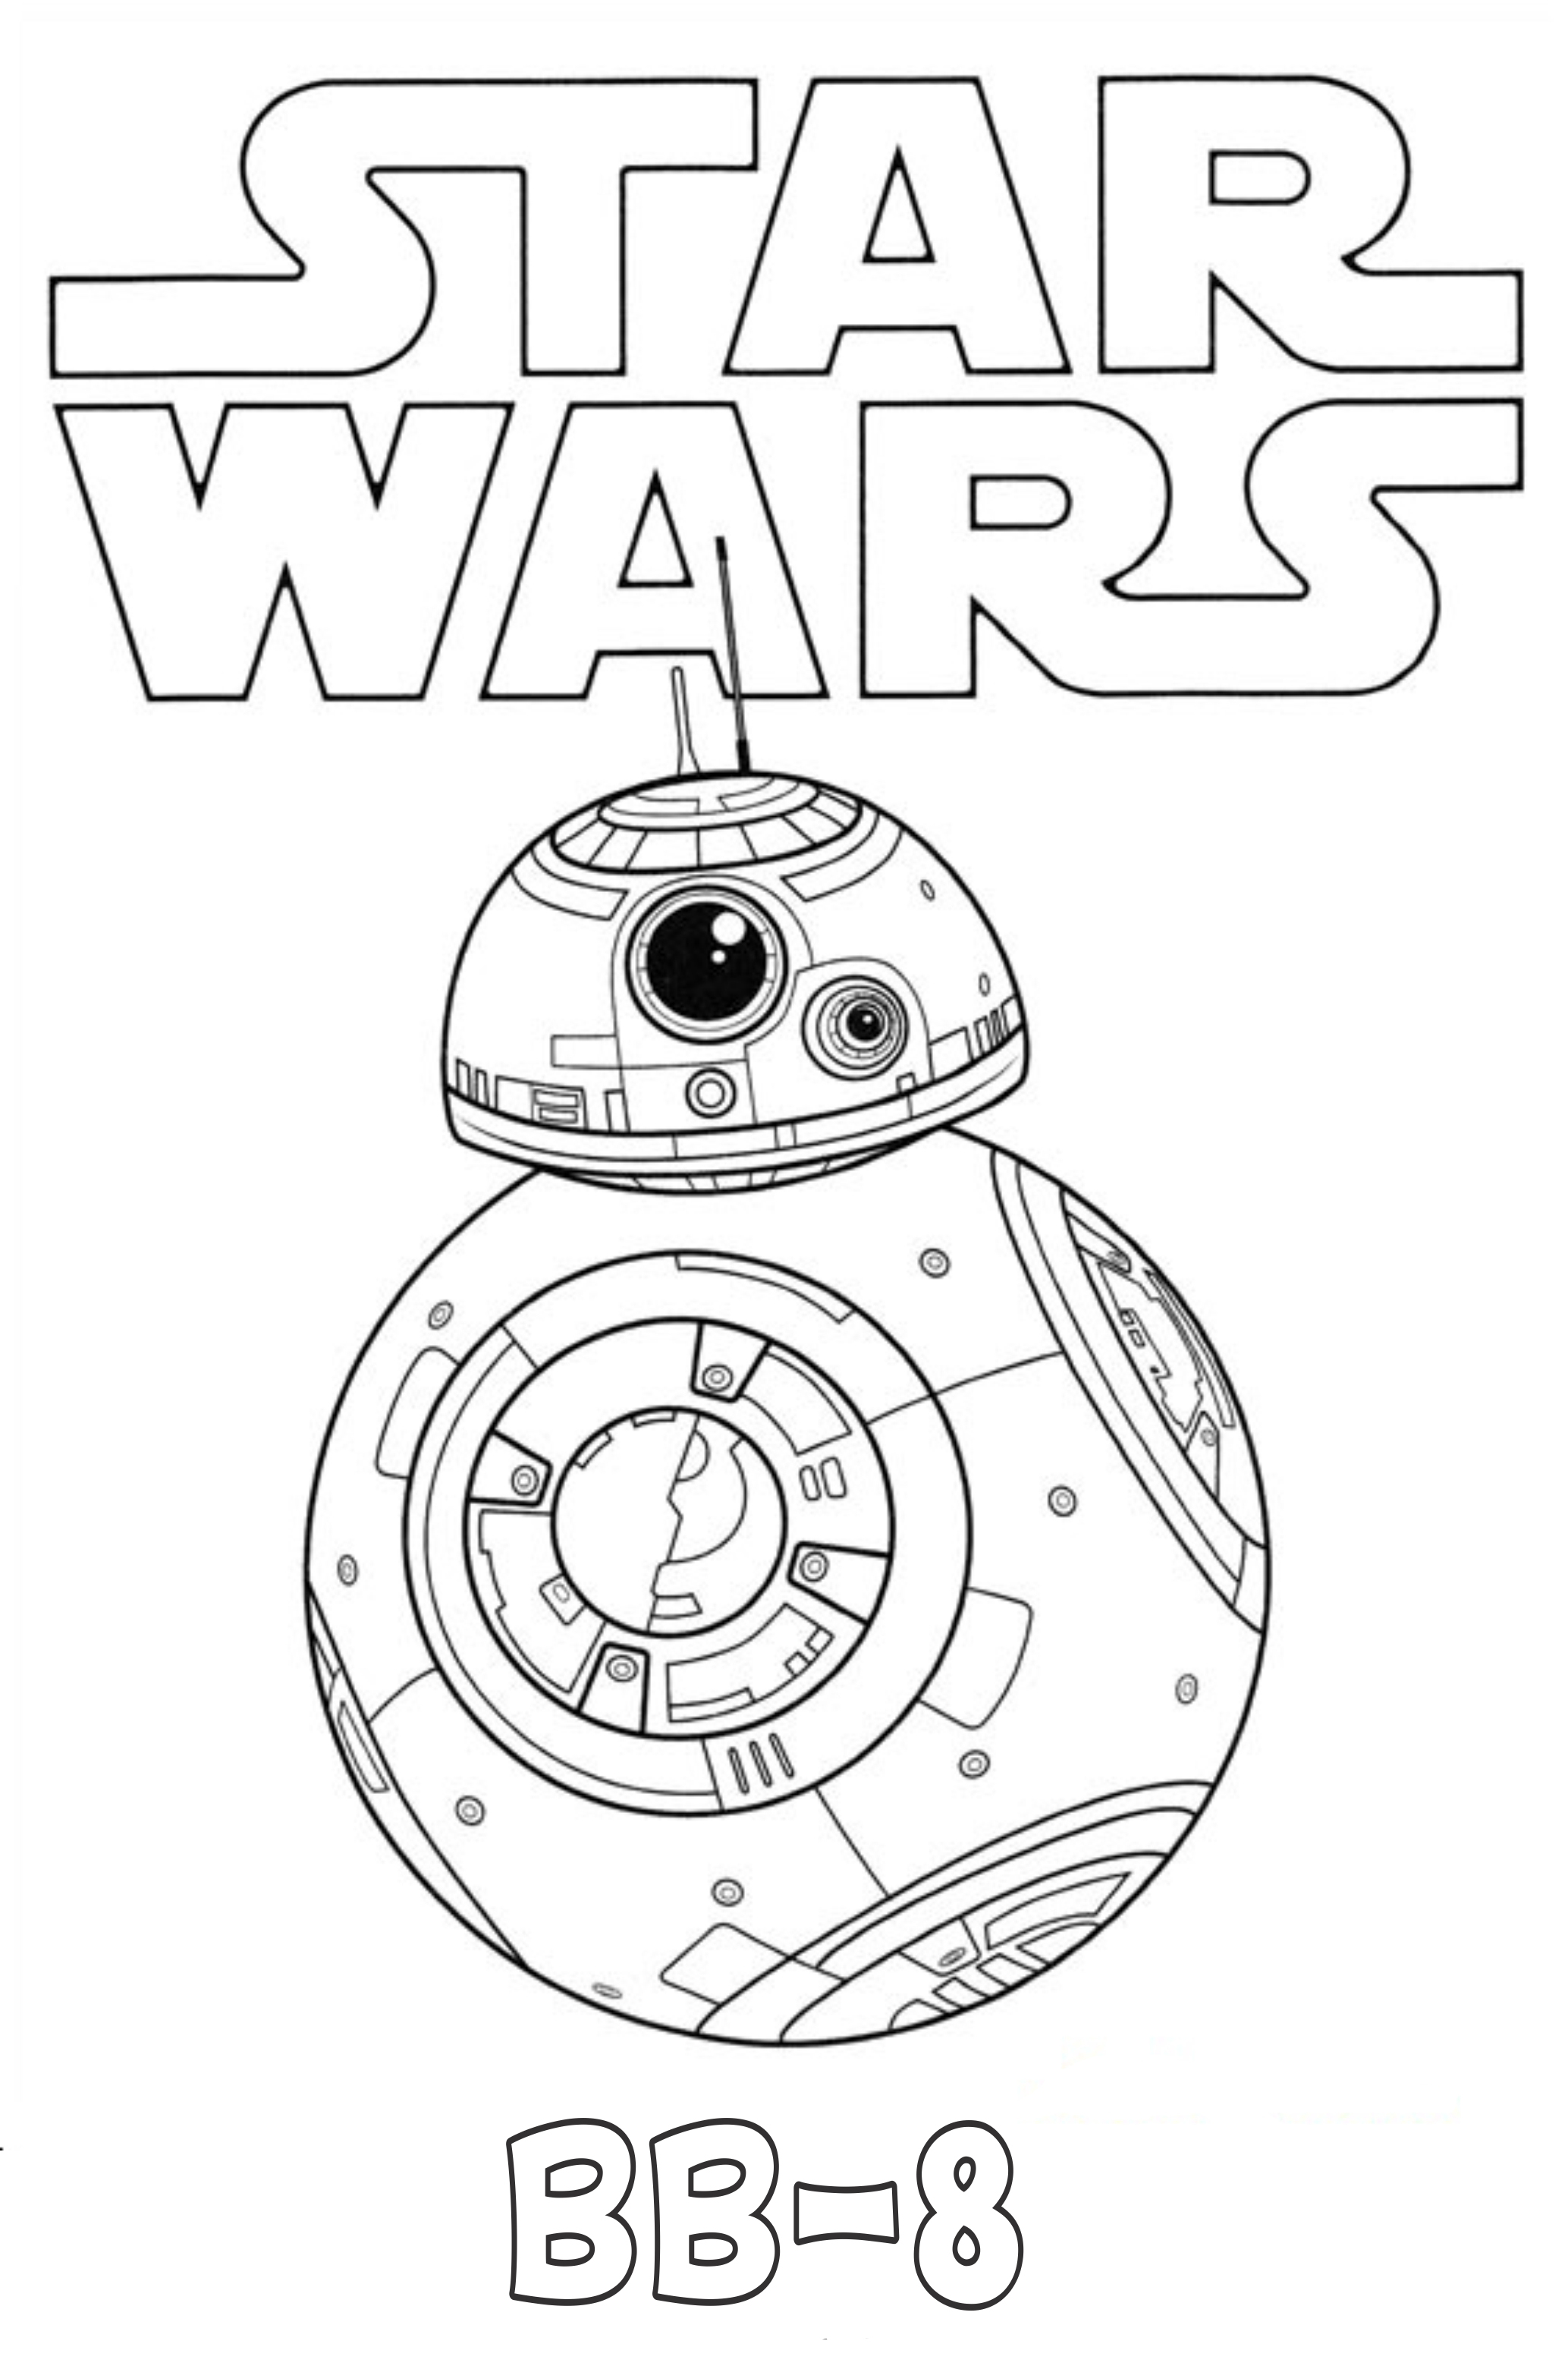 Download BB-8 Coloring Pages - Best Coloring Pages For Kids